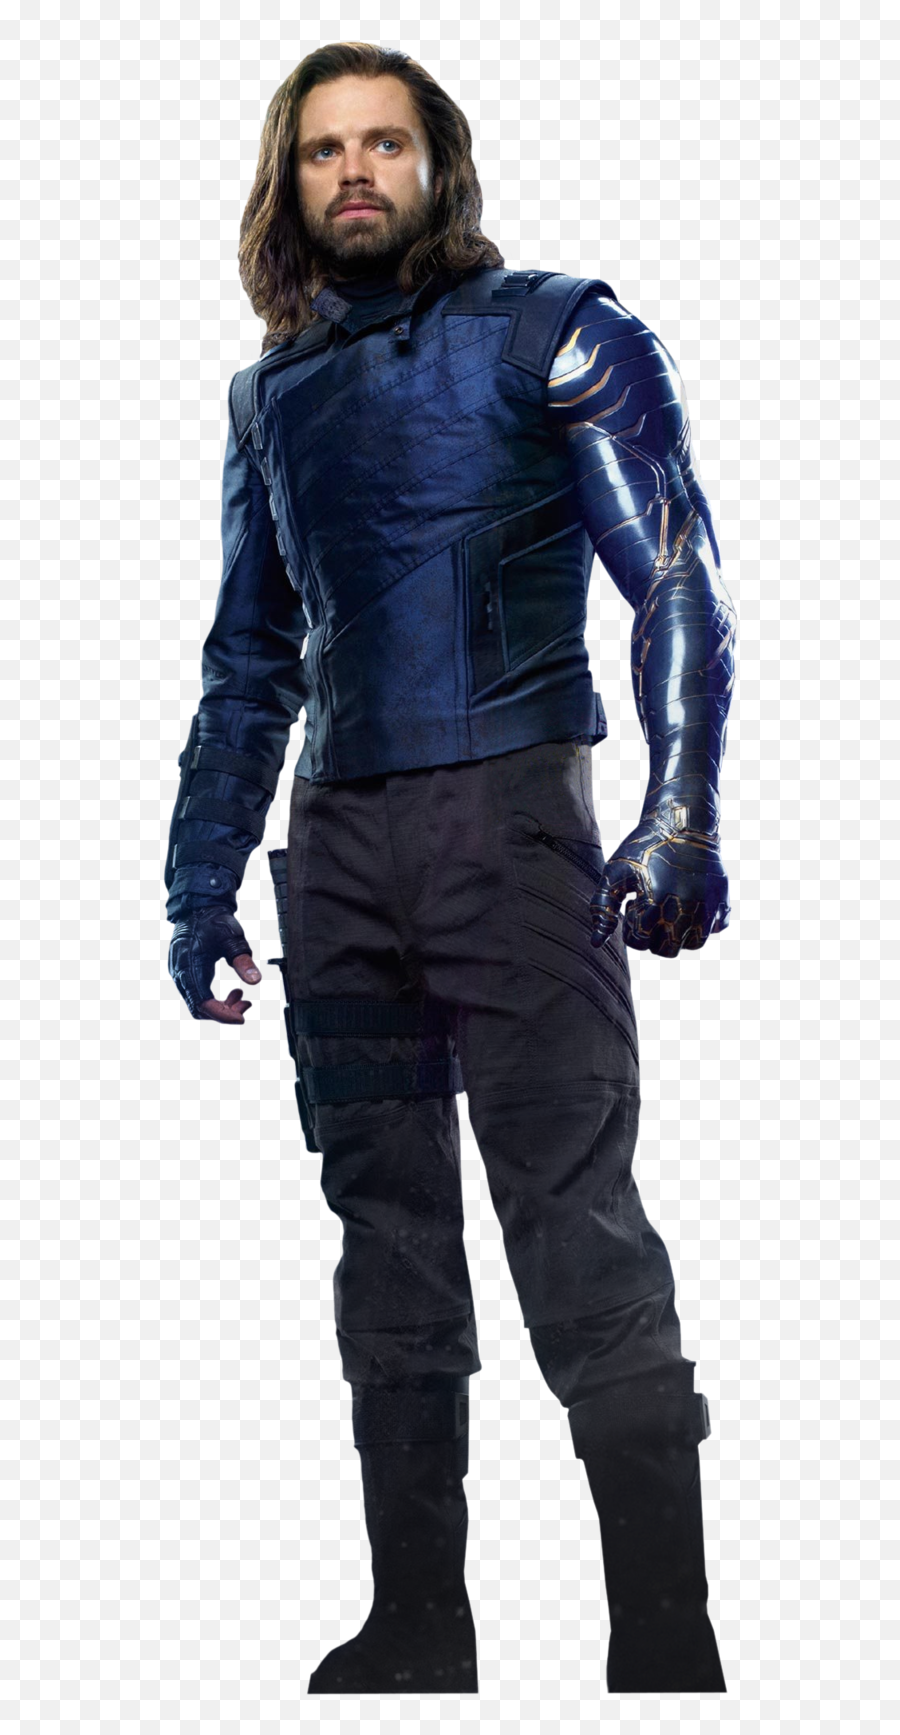 Bucky Barnes Png 3 Image - Bucky Barnes Png,Bucky Barnes Png